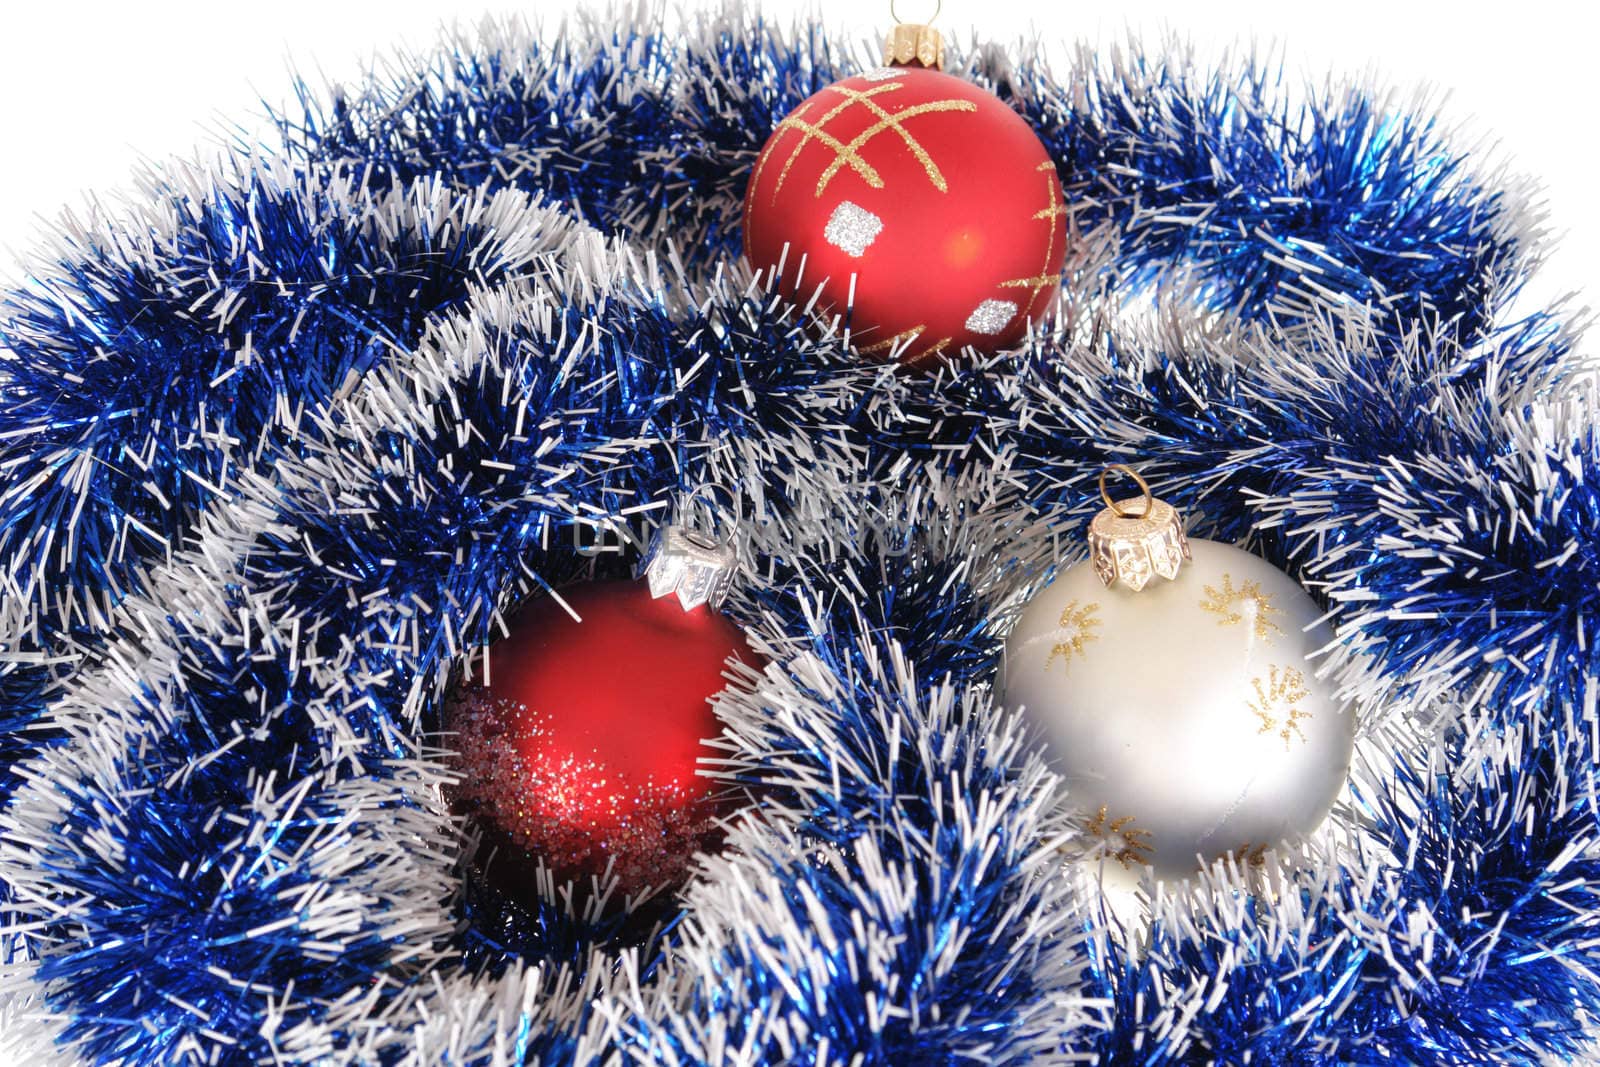 Multi-coloured Christmas-tree decorations lay on a garland                               